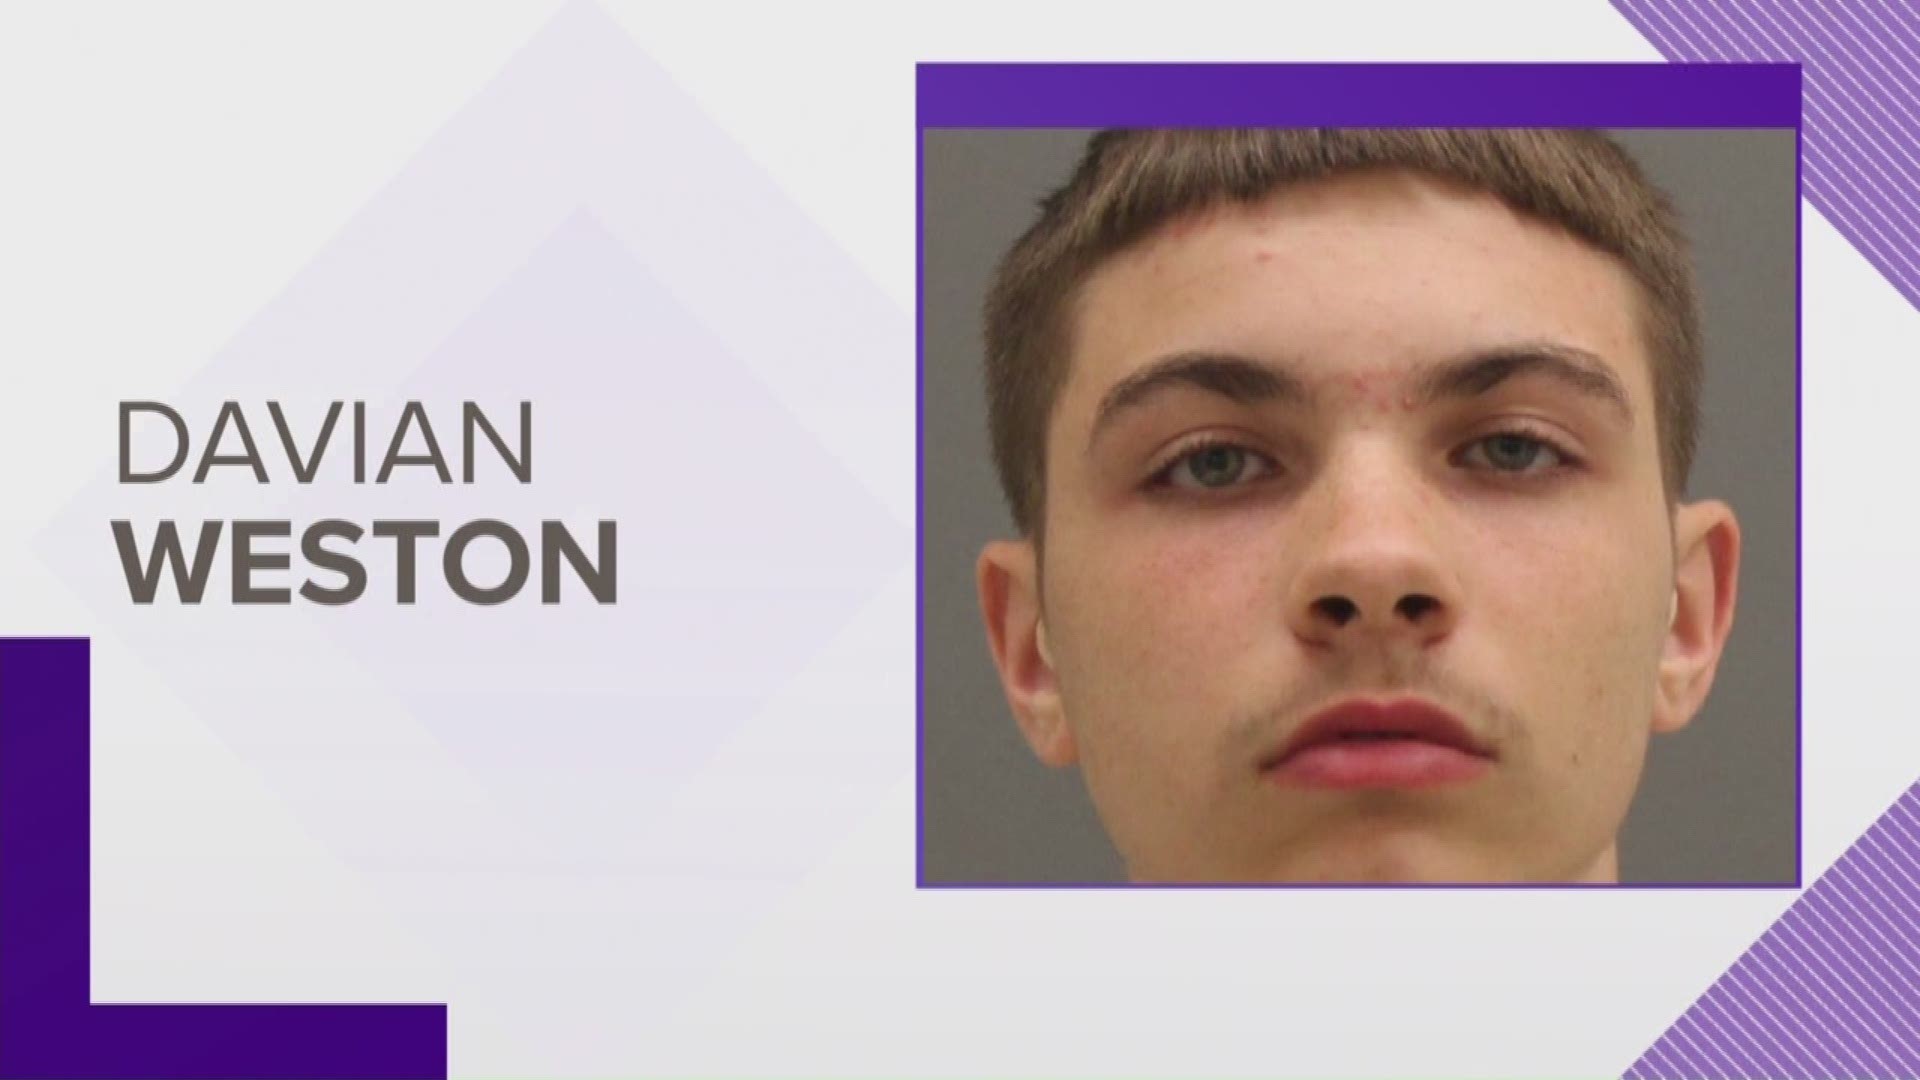 17-year-old arrested again after bringing gun to school